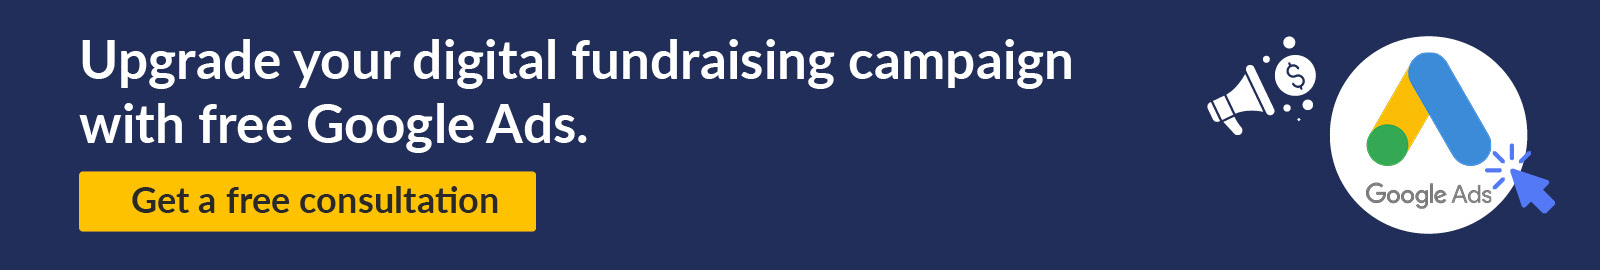 Click to upgrade your digital fundraising campaign with free Google Ads.